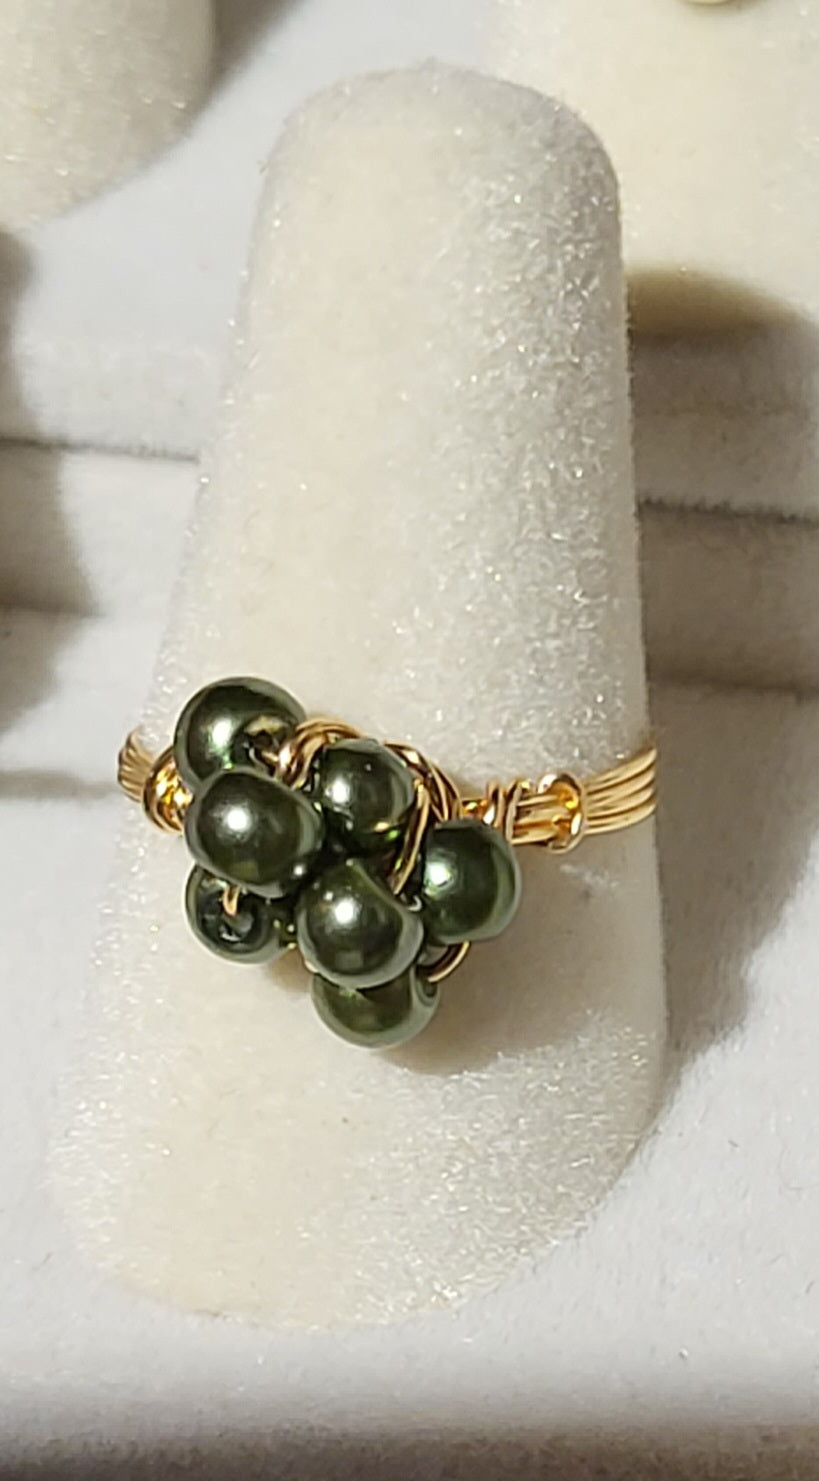 Tiny Hunter Green Pearl Cluster Ring. Gold tone. Size 7.5